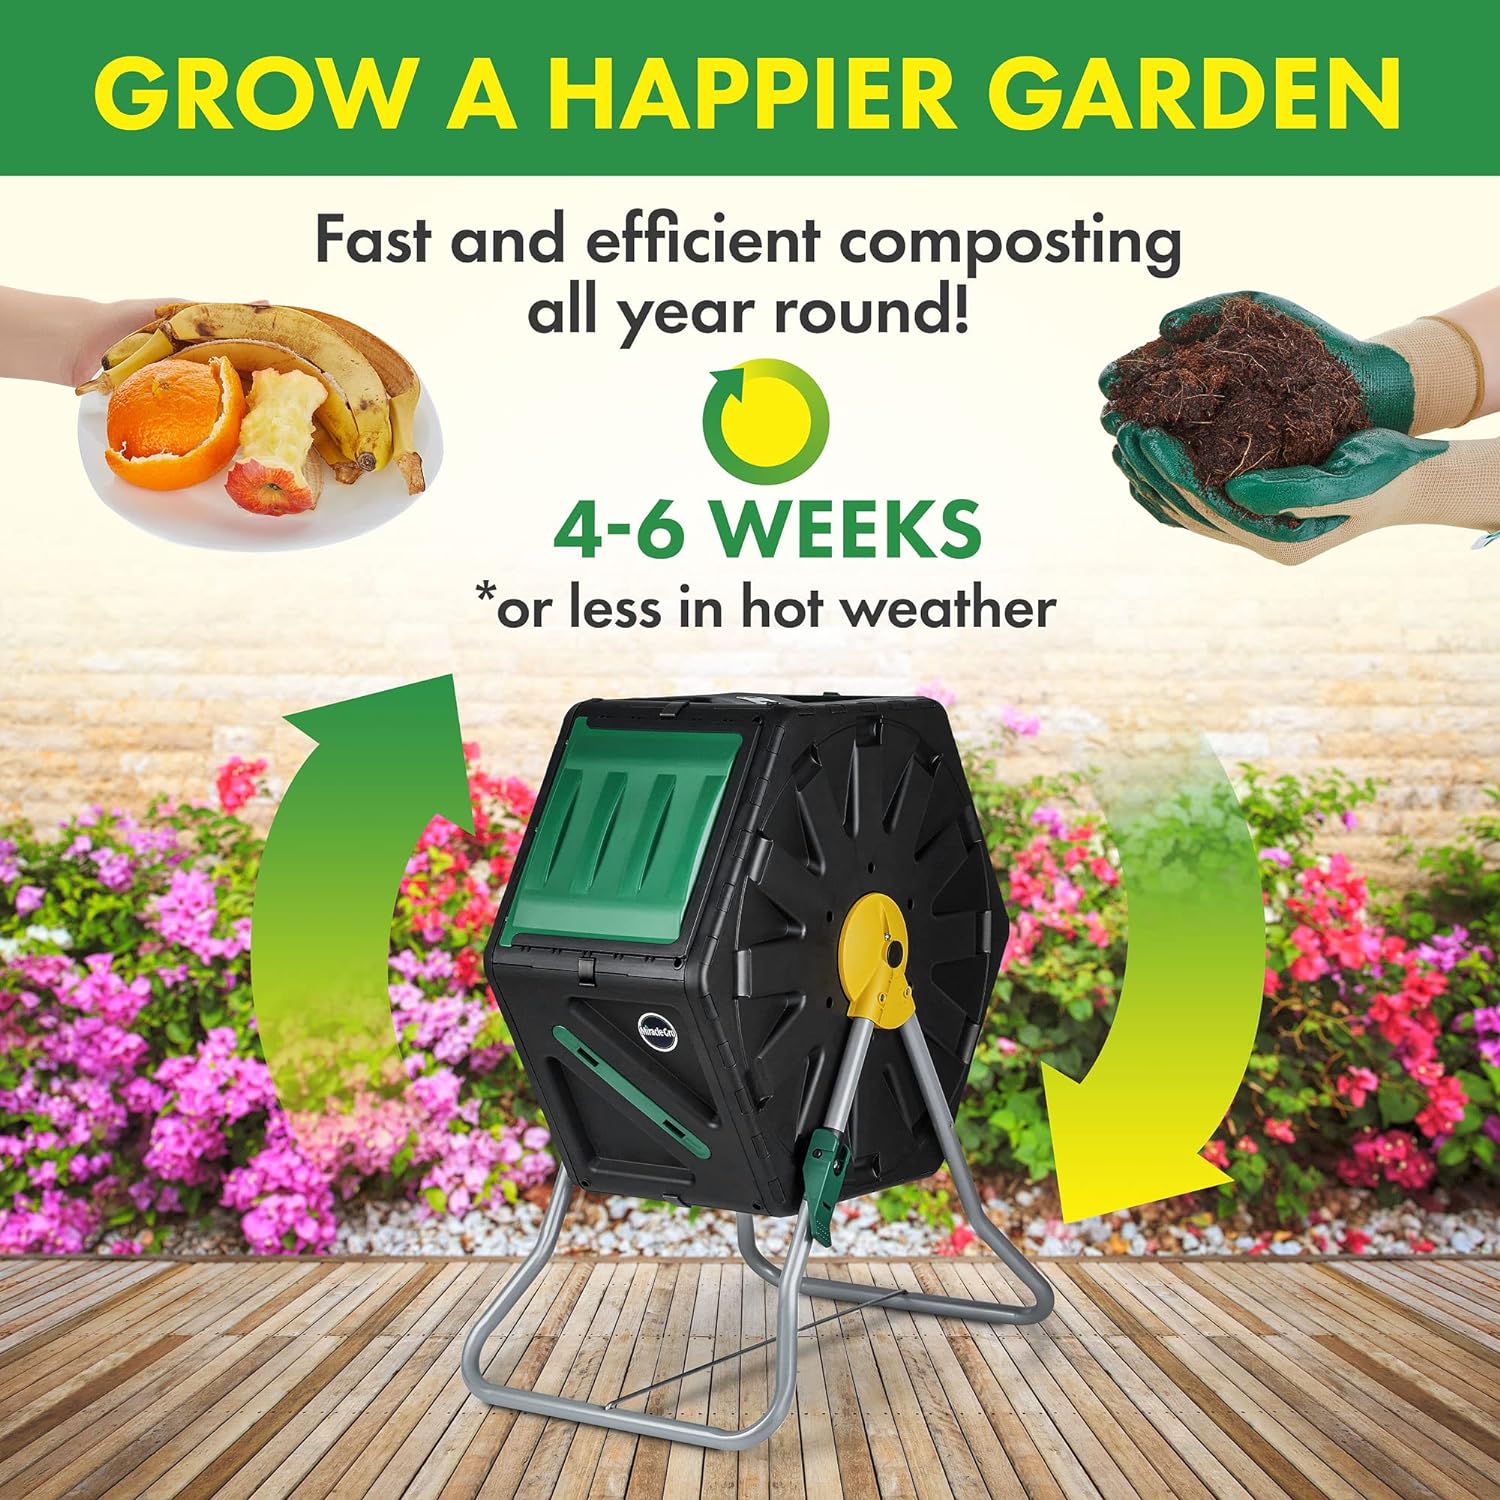 Miracle-Gro Small Composter Review